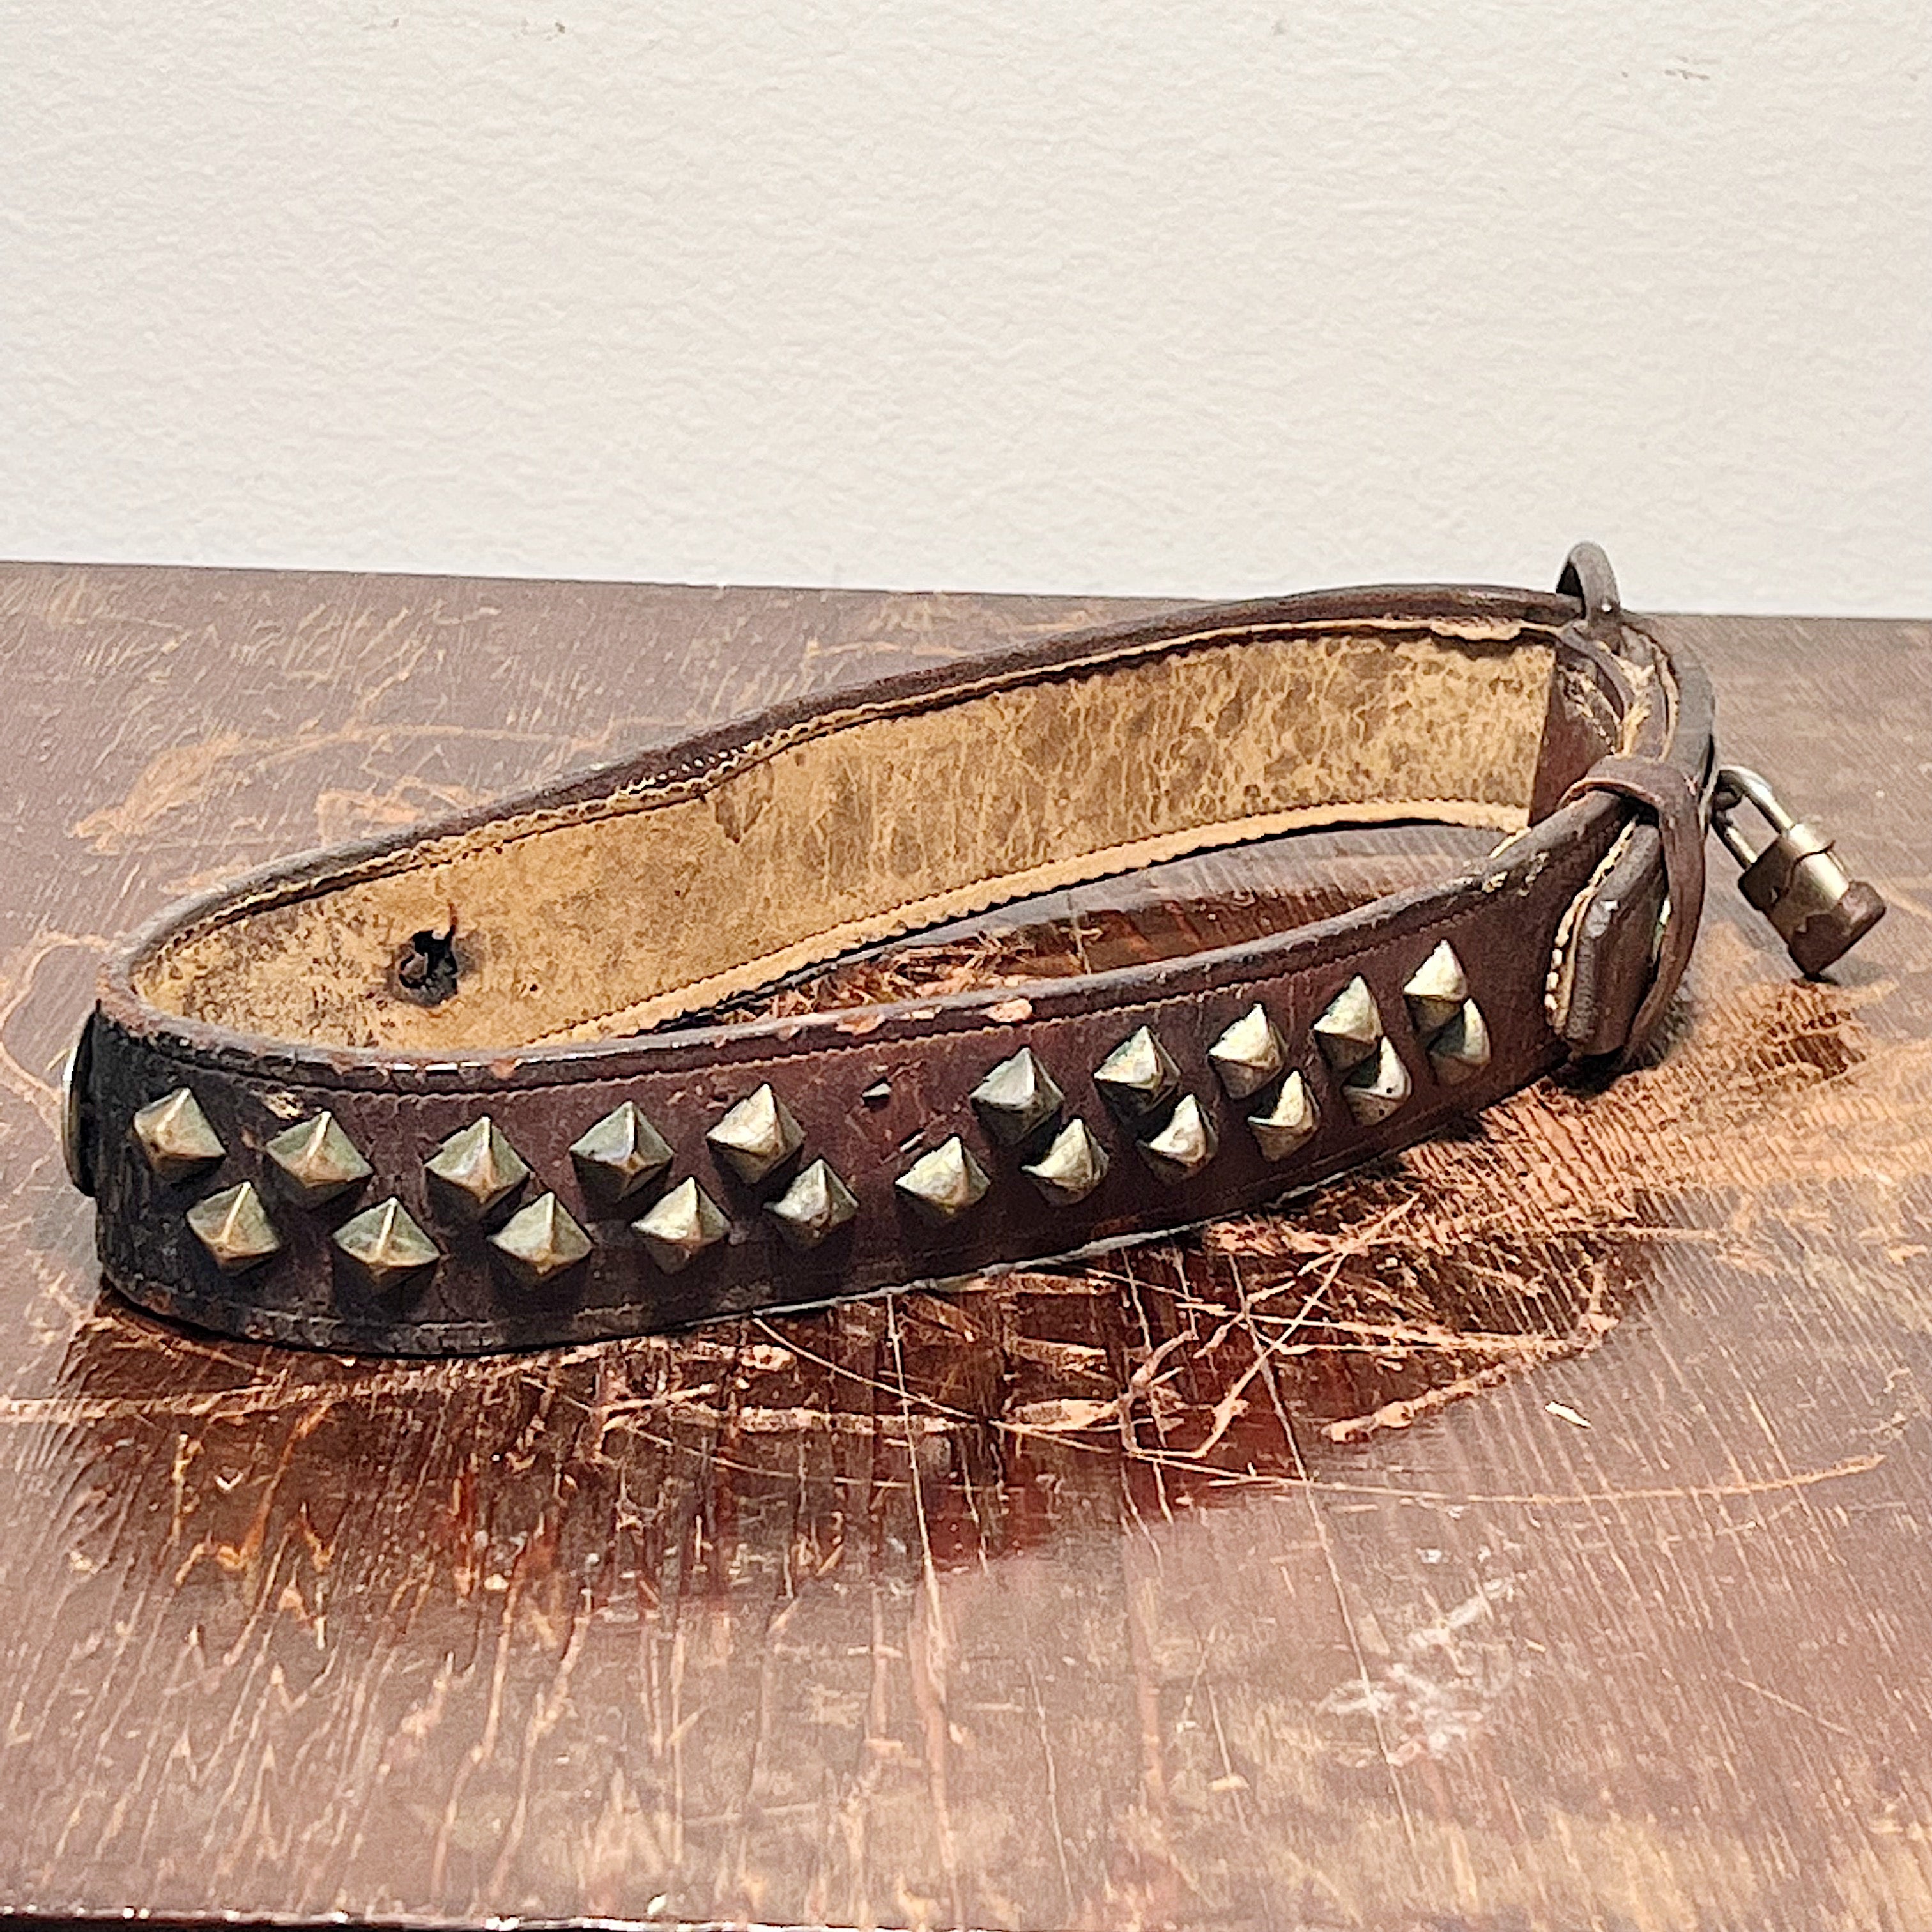 Rare Antique Studded Dog Collar with "Victor Hugo Jr" Tag - Early 1900s Leather Buckle Collars - Punk Rock Style - Rare Bulldog Collectible